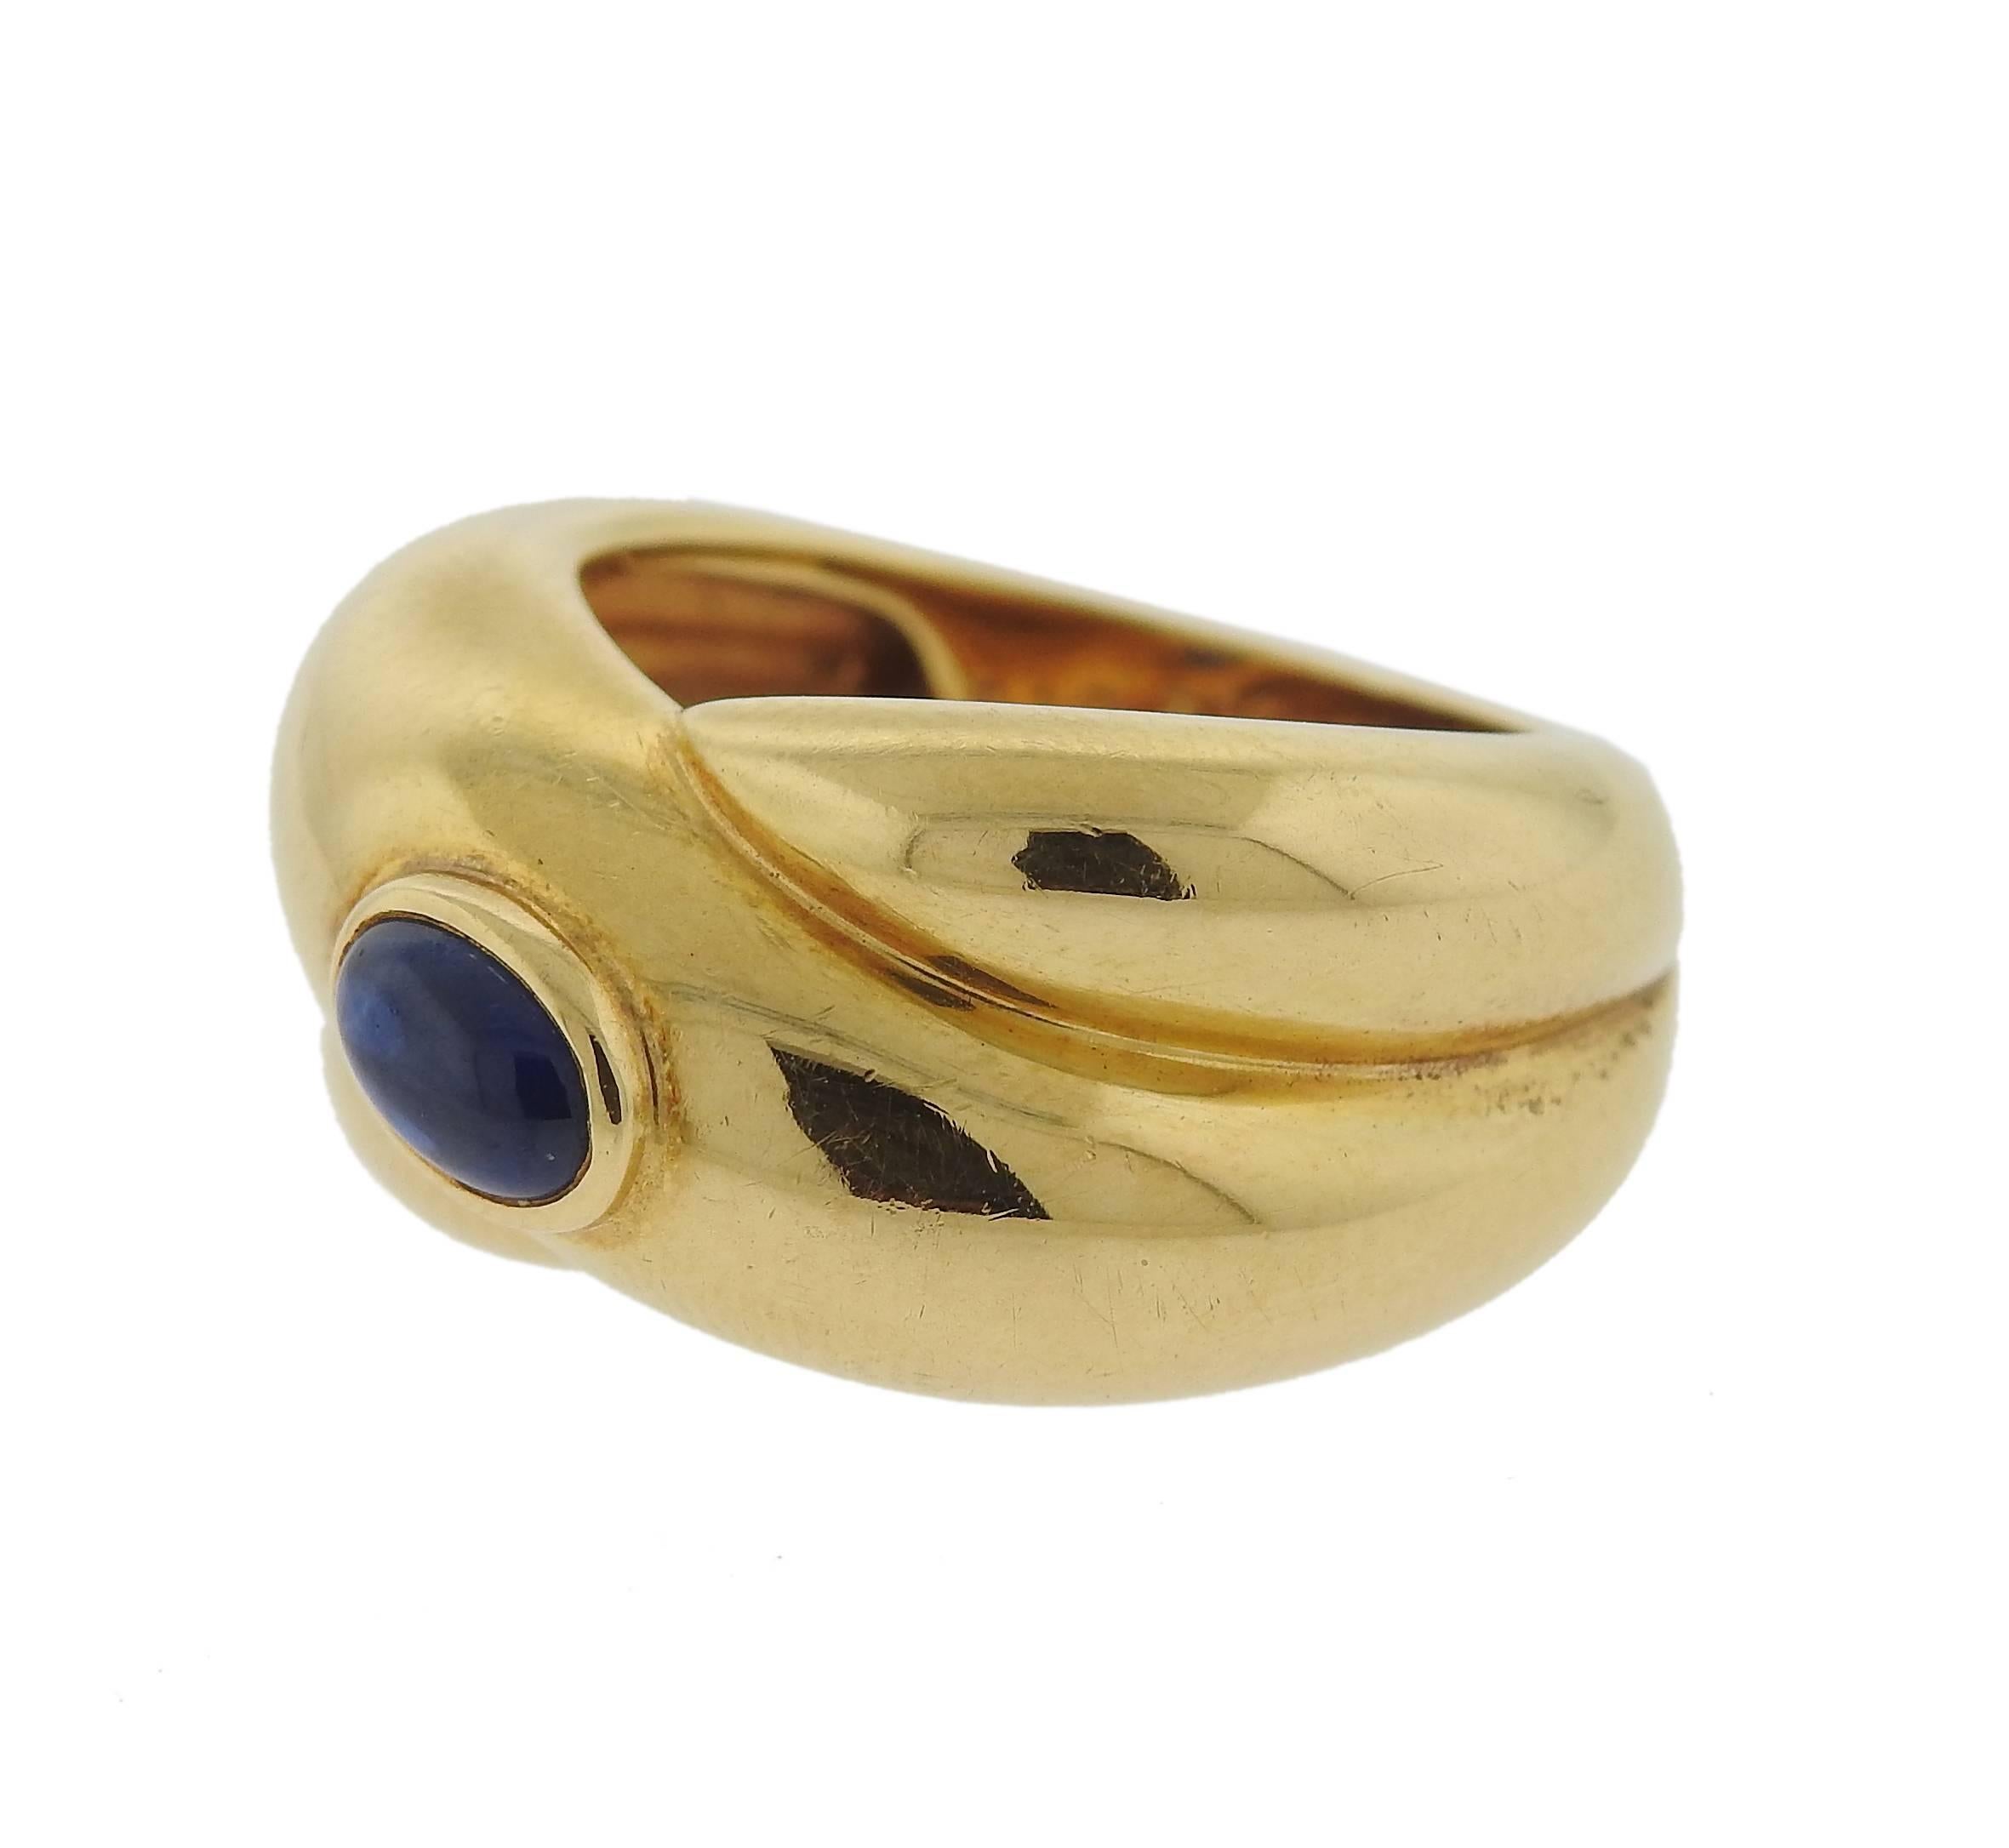 18k yellow gold crossover ring, crafted by Cartier, set with an oval sapphire cabochon in the center. Ring is a size 5 and is 11mm wide. Marked:  49,  Cartier, 1992, 750, C12572. Weight of the piece - 8.8 grams